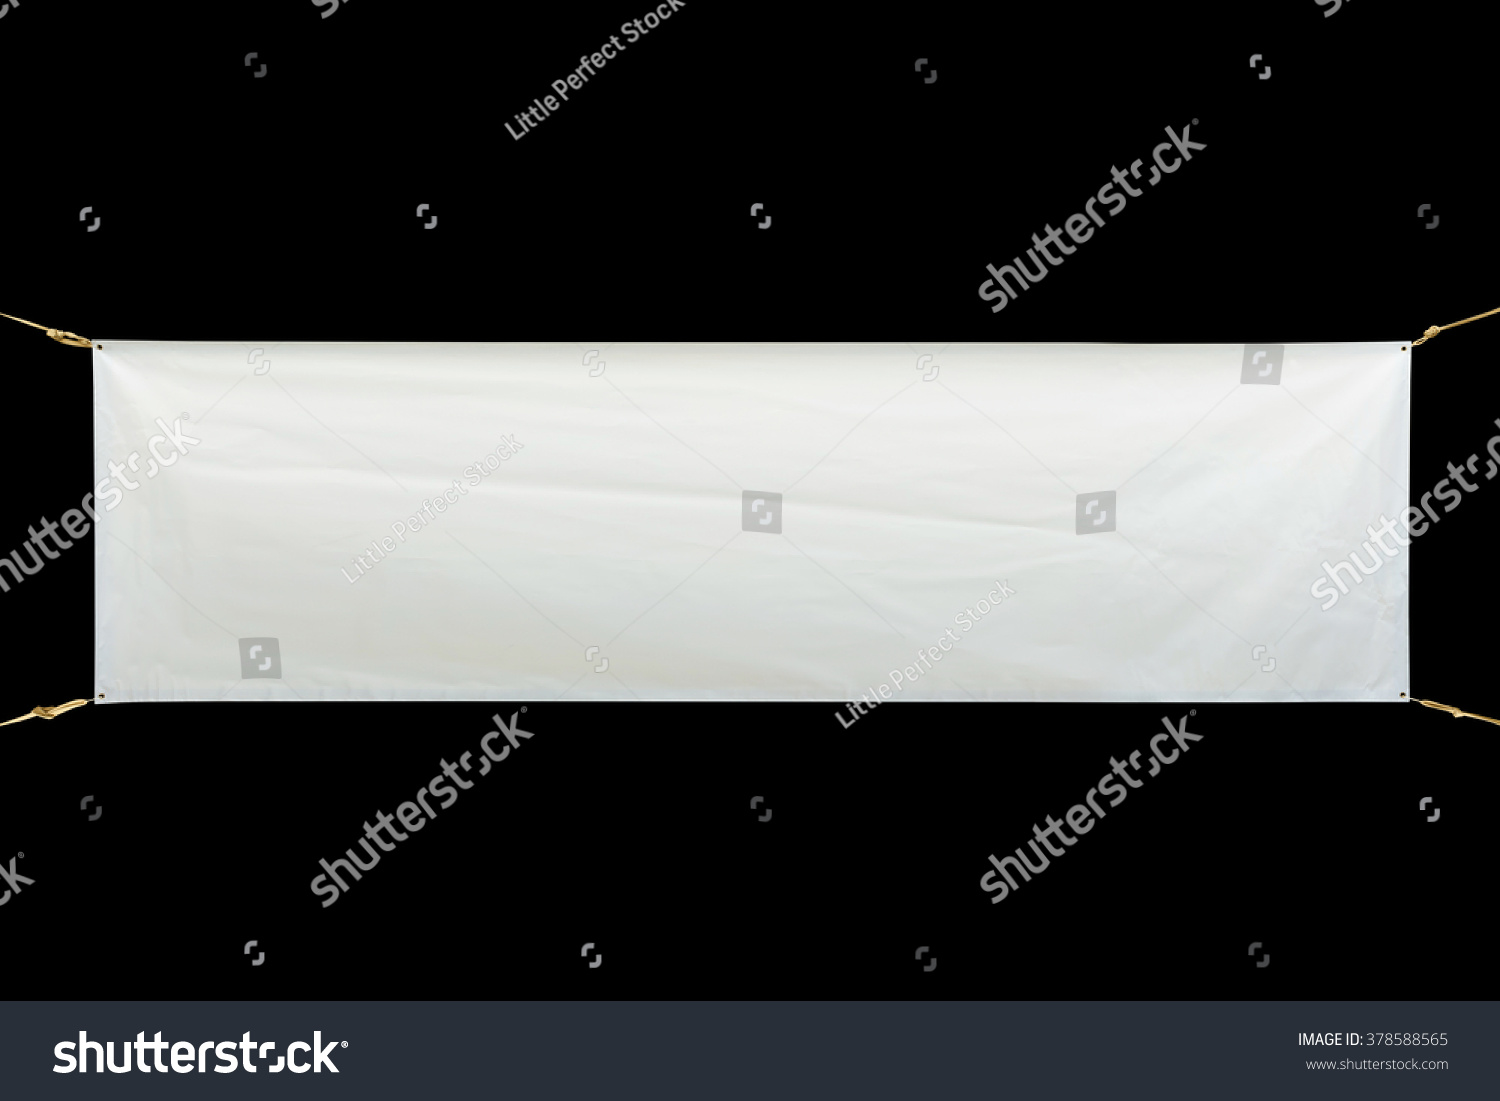 Copy Space Text On Long White Stock Photo 378588565 